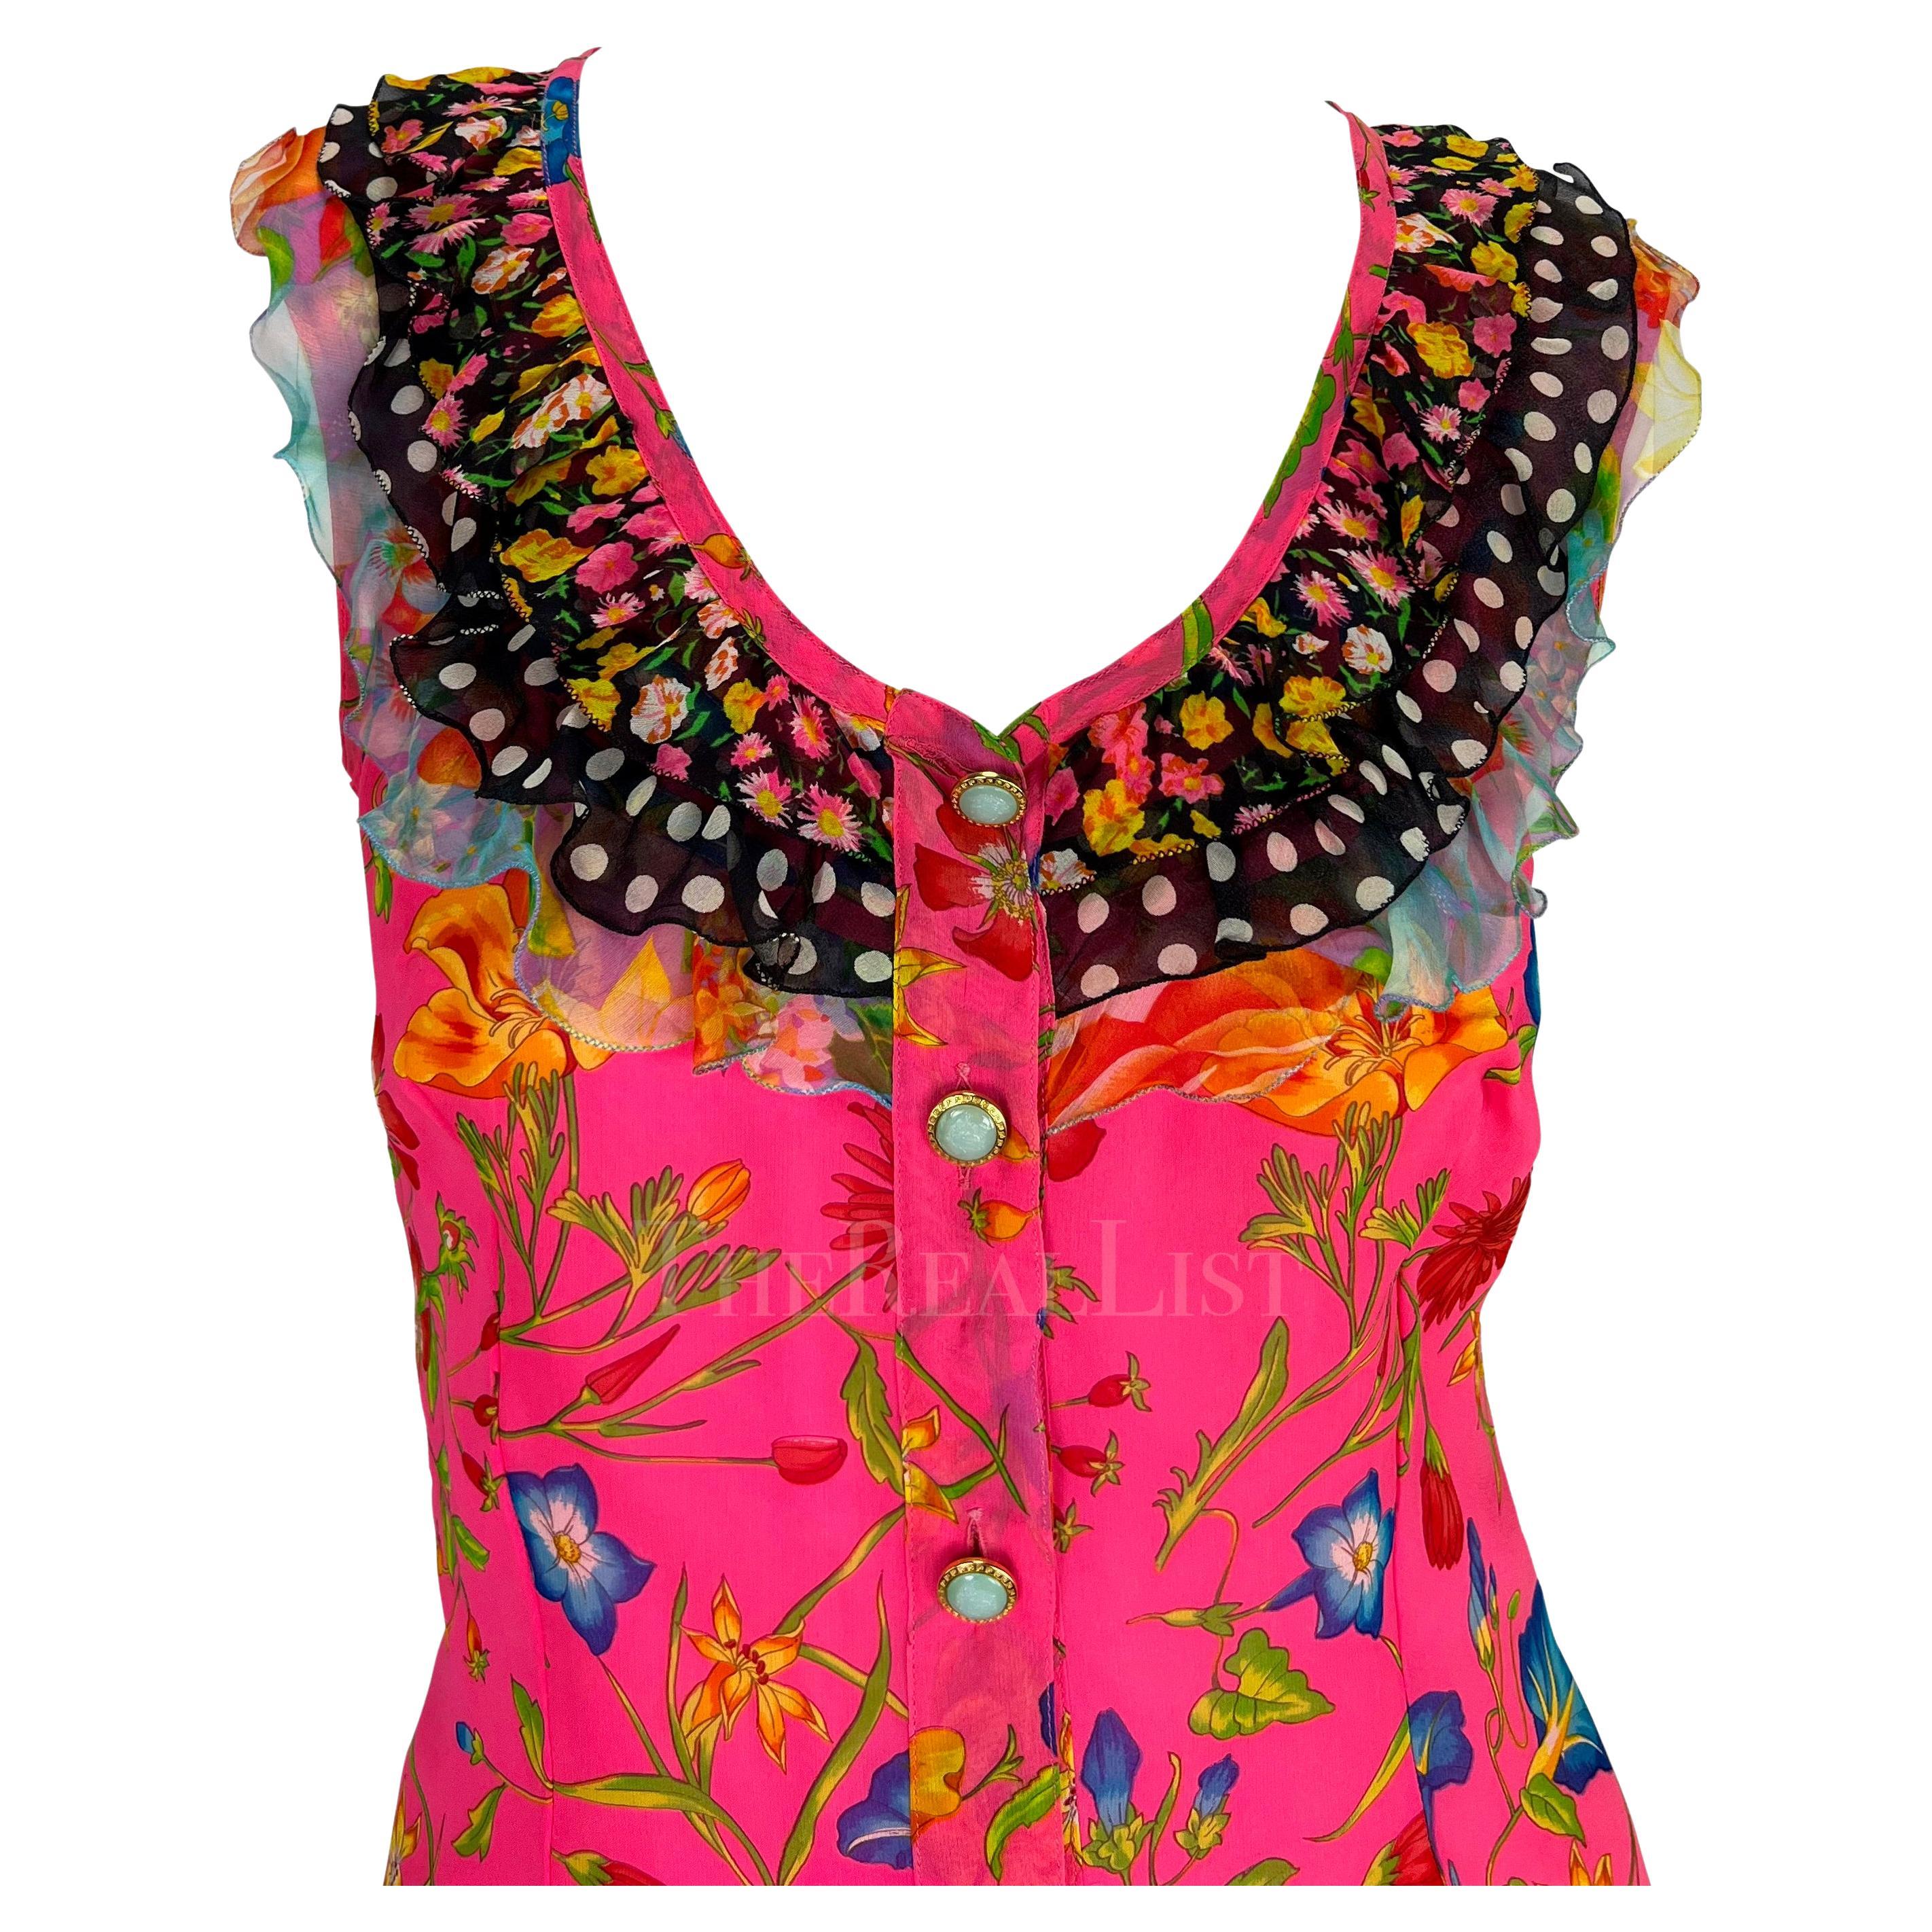 S/S 1993 Gianni Versace Runway Pink Floral Ruffle Medusa Sleeveless Top In Excellent Condition For Sale In West Hollywood, CA